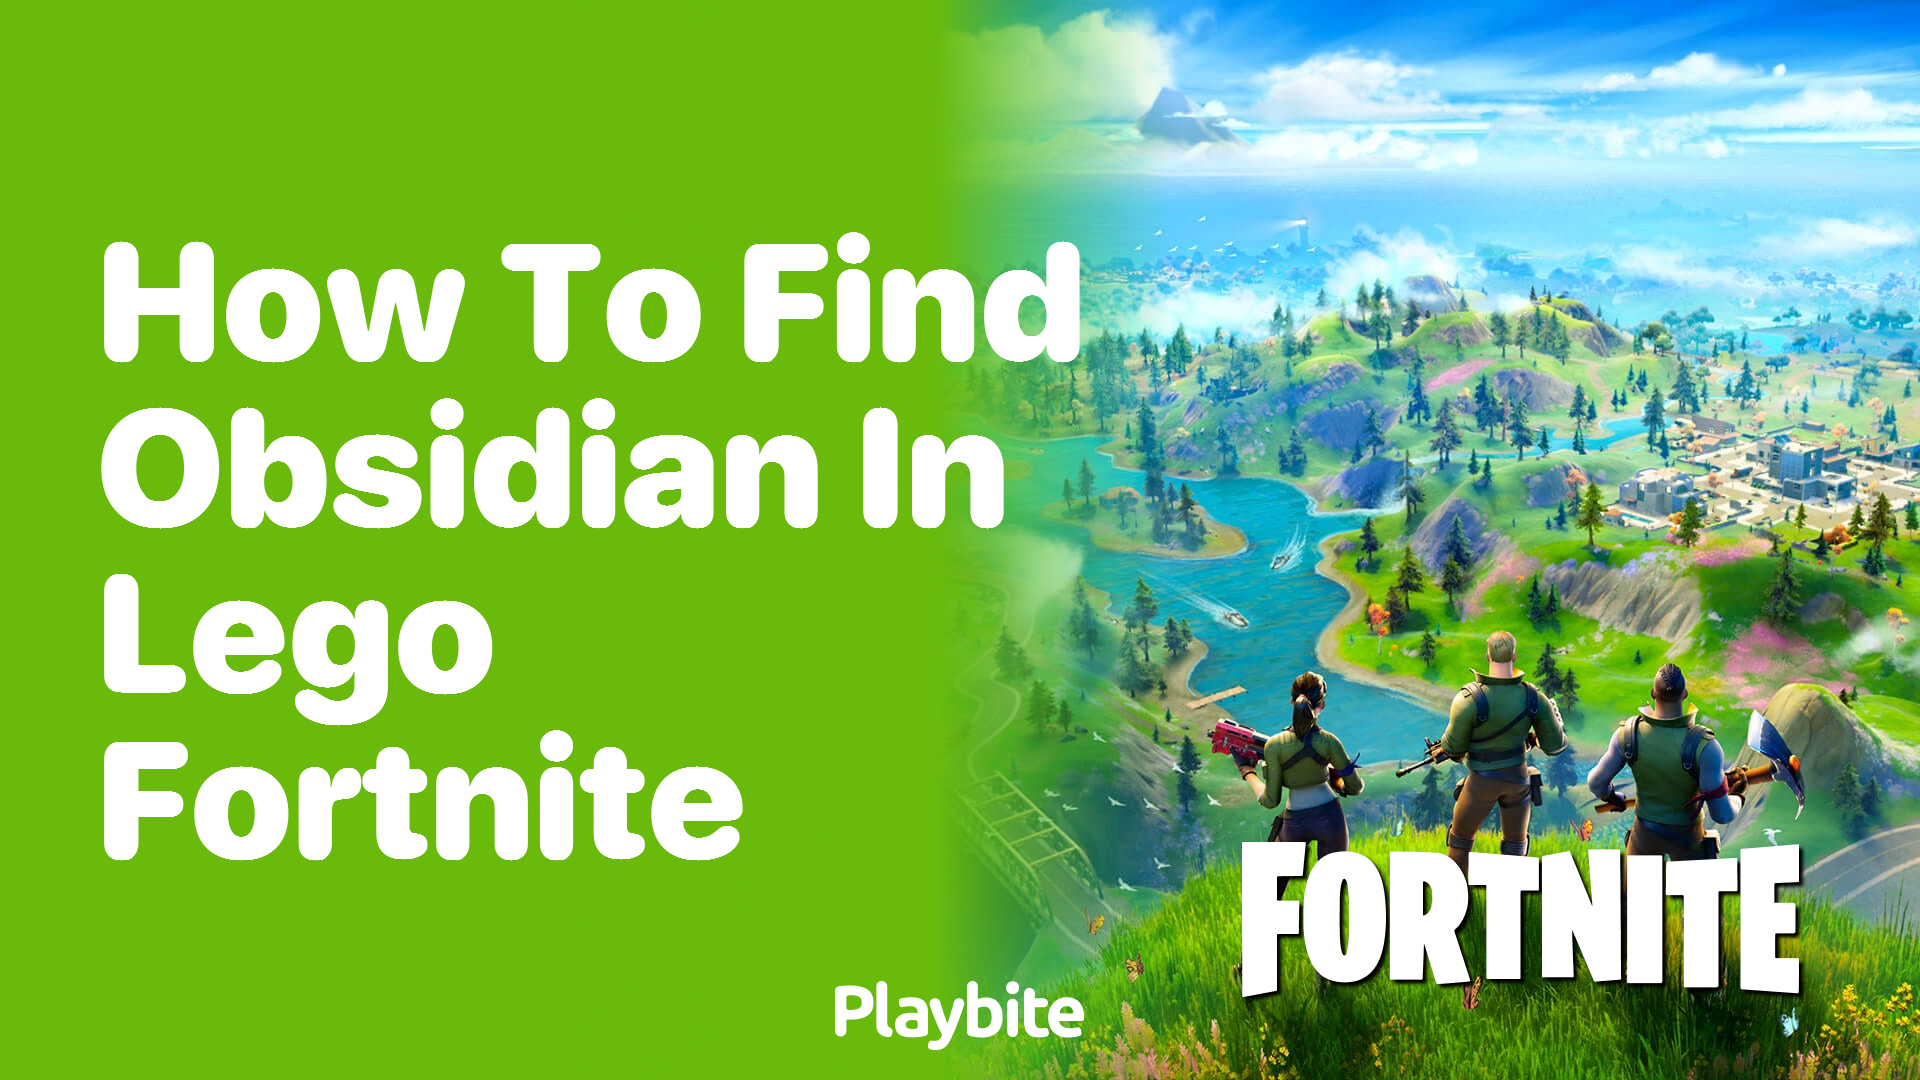 How to Find Obsidian in LEGO Fortnite?